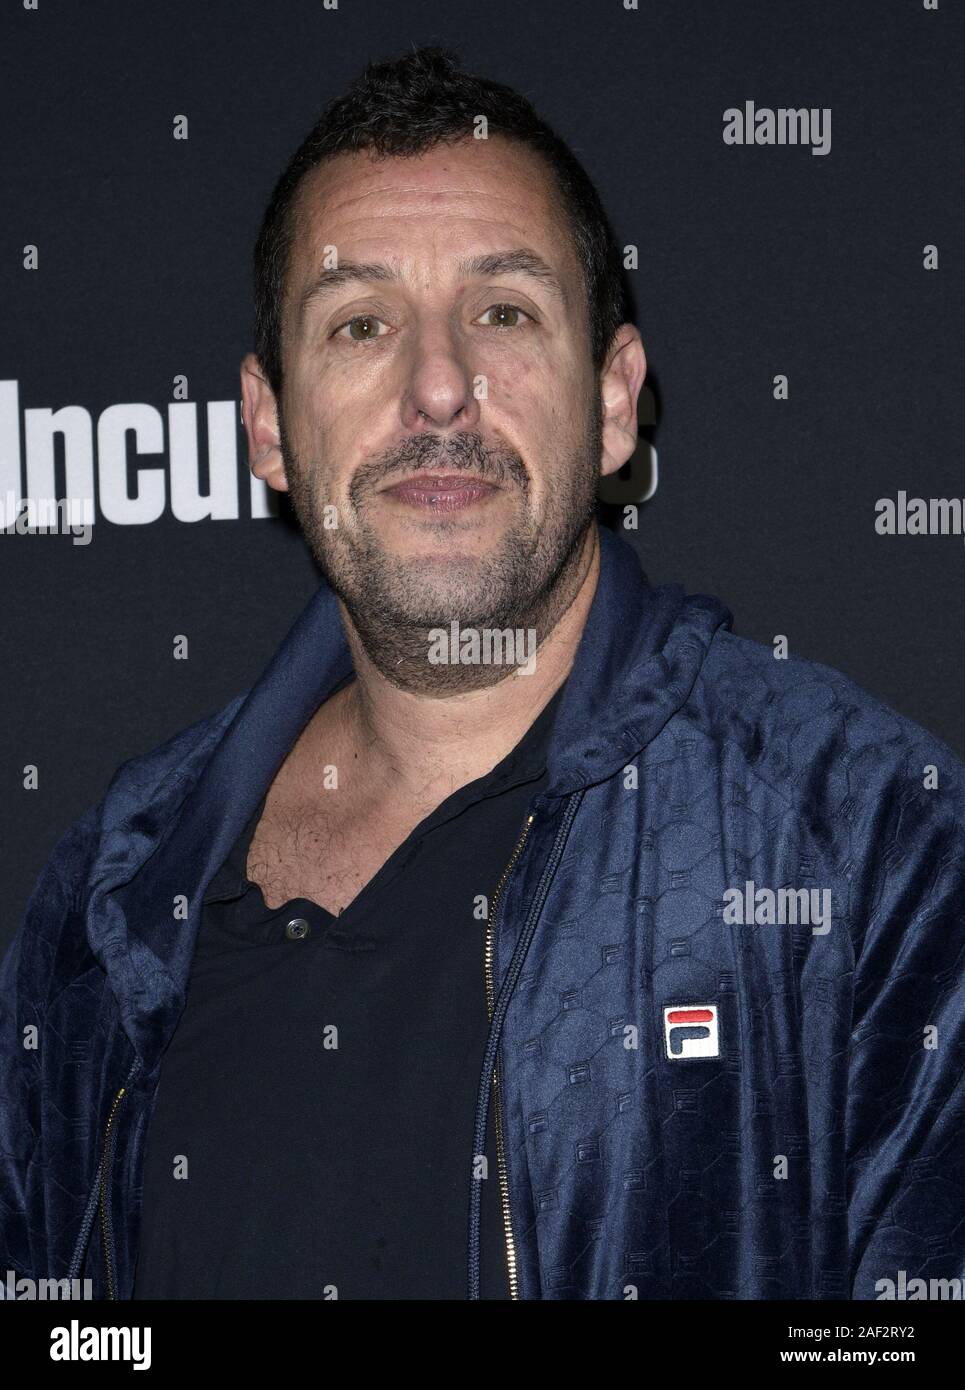 HOLLYWOOD, CA - DECEMBER 11: Adam Sandler, at Premiere Of A24's "Uncut Gems" at The Dome at Arclight Hollywood in Hollywood, California on December 11, 2019. Credit: Faye Sadou/MediaPunch Stock Photo